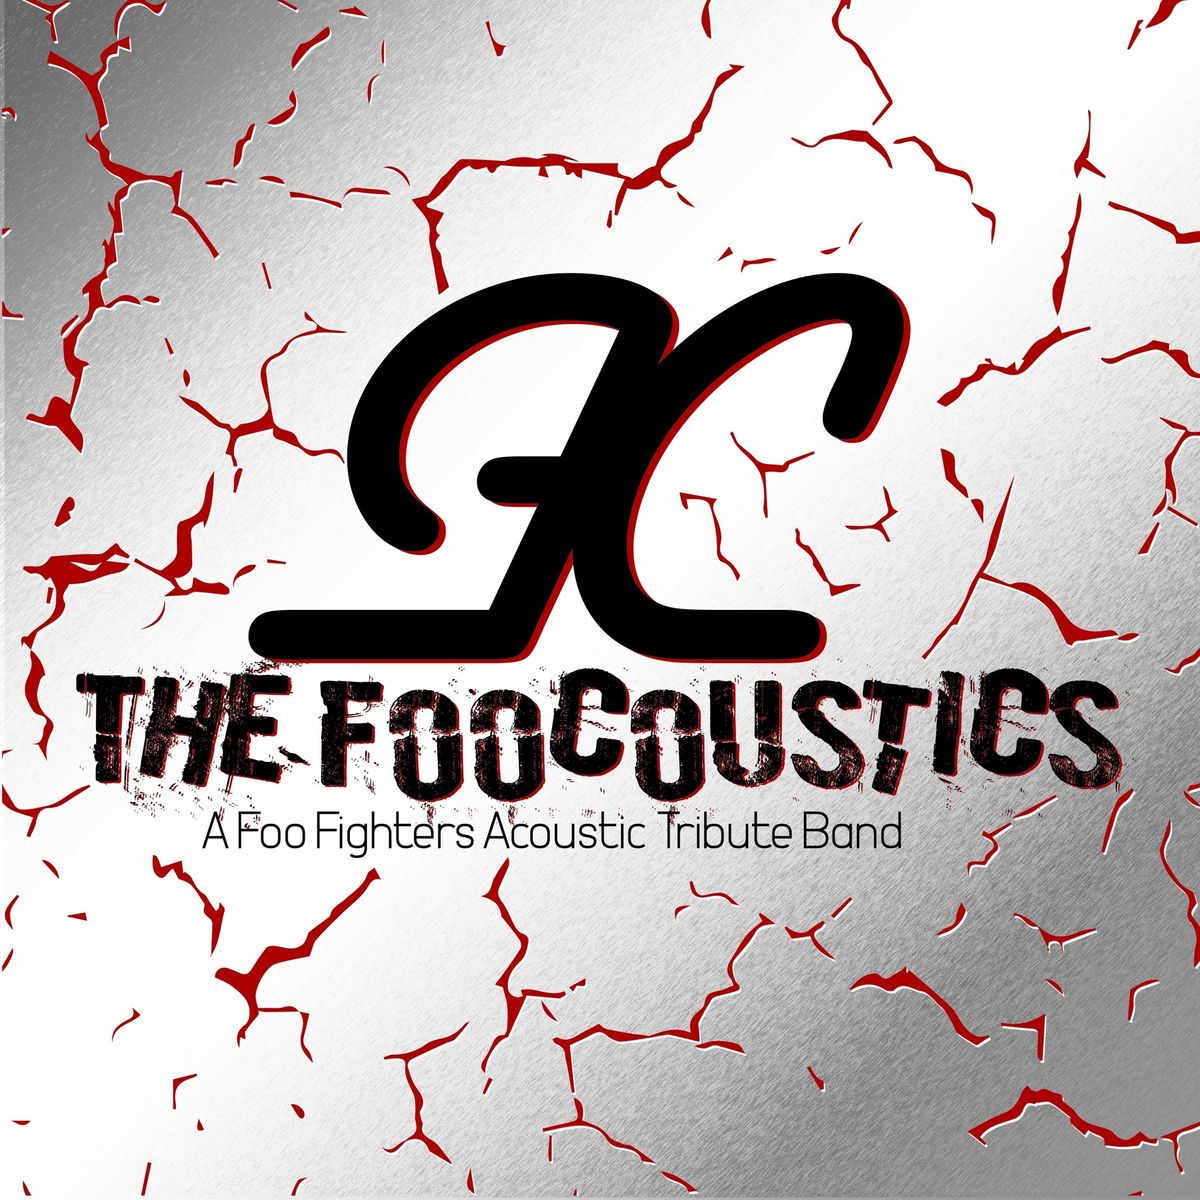 THURSDAY NIGHT LIVE: The Foocoustics\/A Foo Fighter Acoustic Tribute Duo!